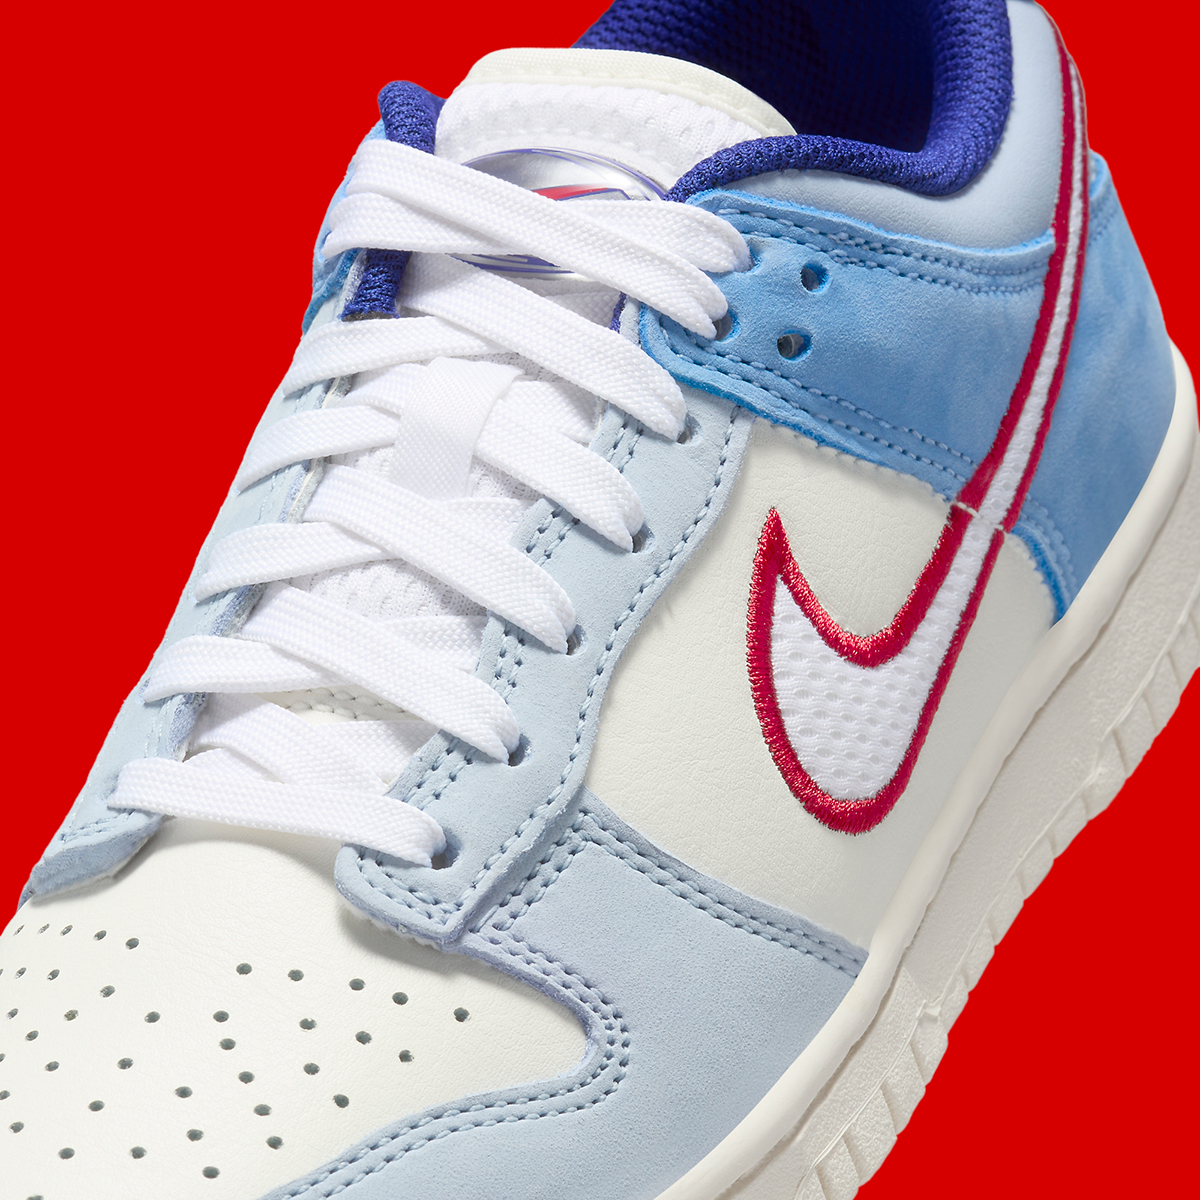 nike All dunk low gs white blue red mesh hf5742 111 1